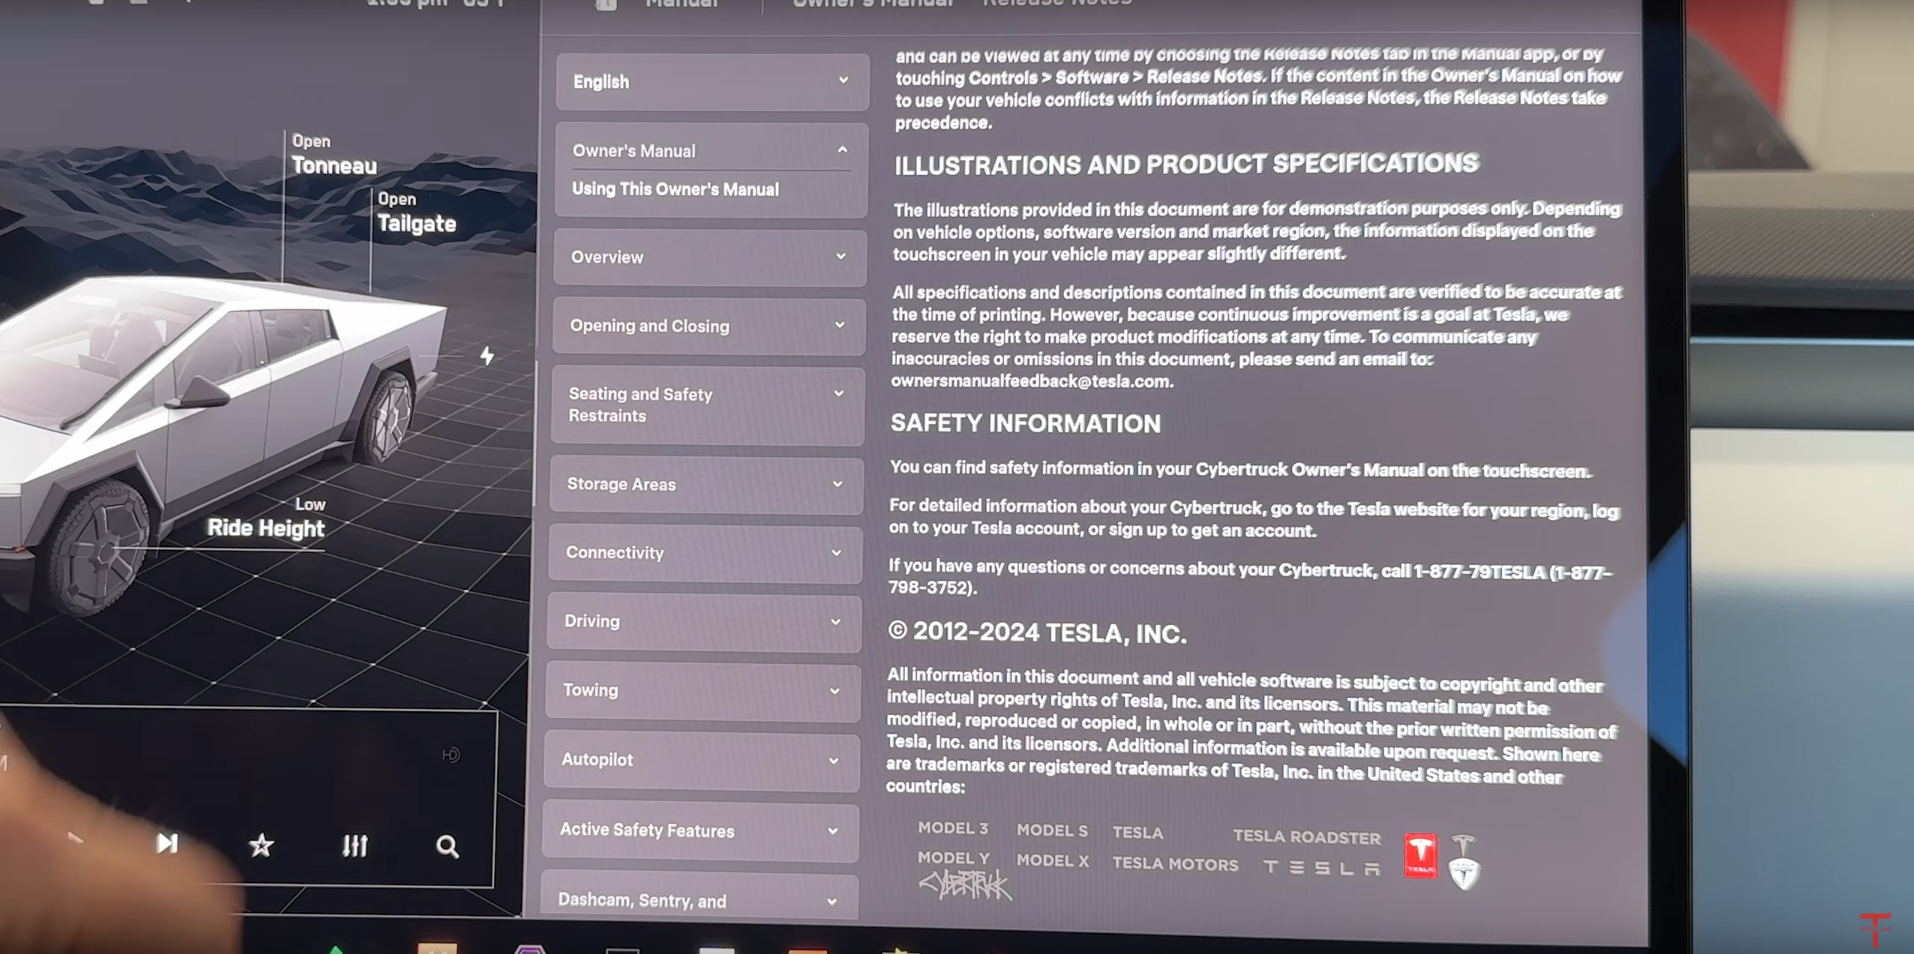 tesla-cybertruck-owners-manual-t-sportline-using-this-guide-2